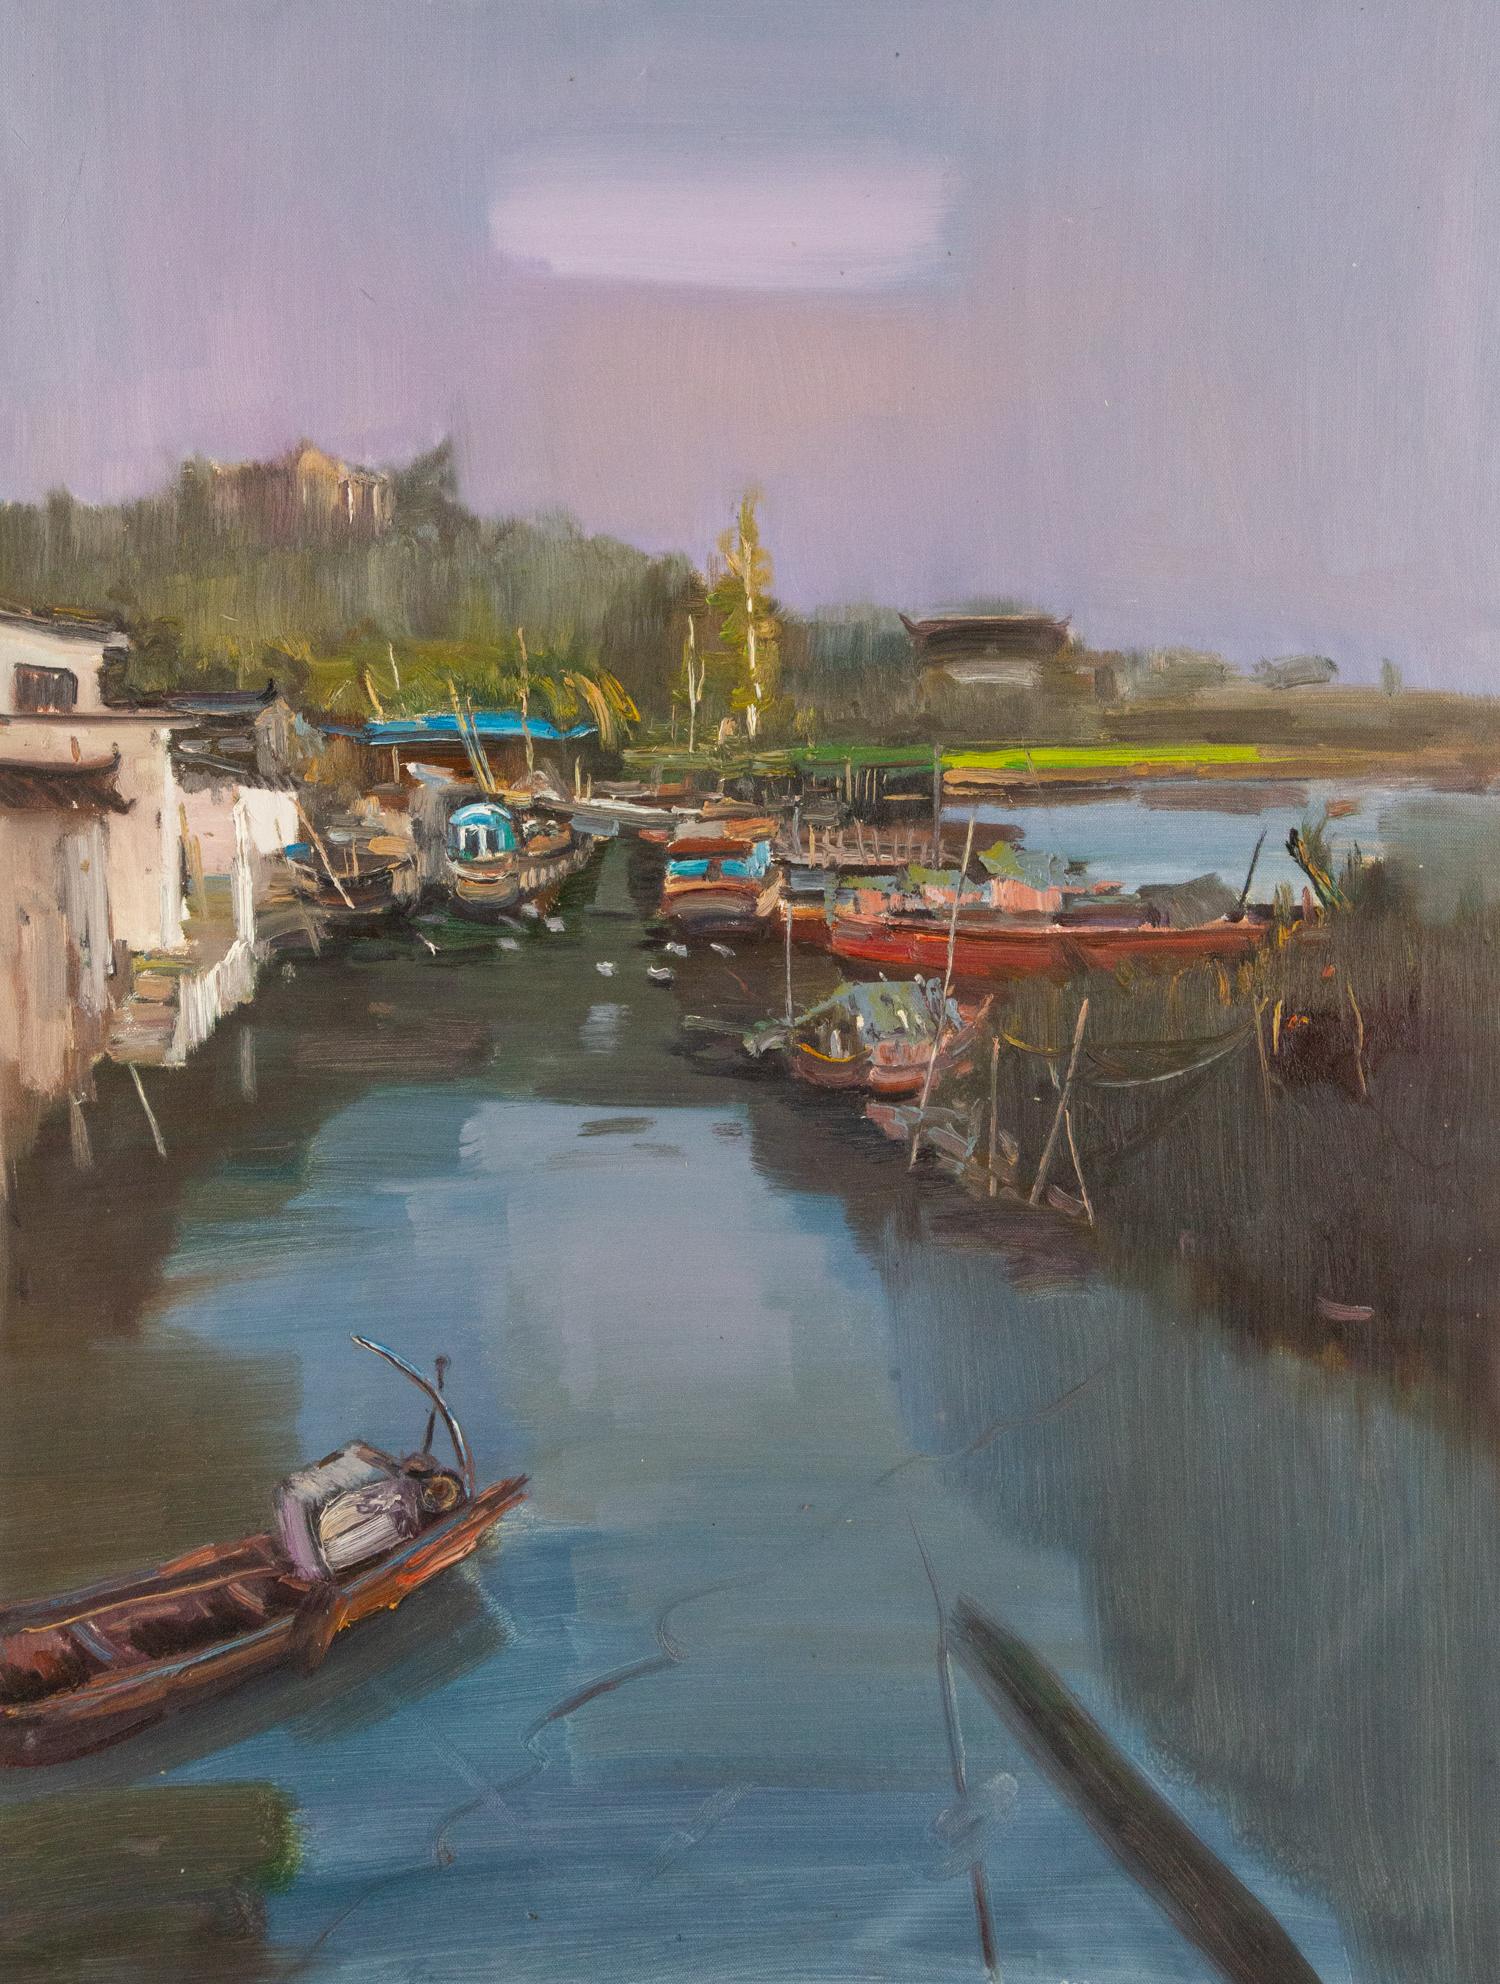 Title: Small Fishing Village 1
Medium: Oil on canvas
Size: 30.75 x 23.5 inches
Frame: Framing options available!
Condition: The painting appears to be in excellent condition.
Note: This painting is unstretched
Year: 2000 Circa
Artist: Yao